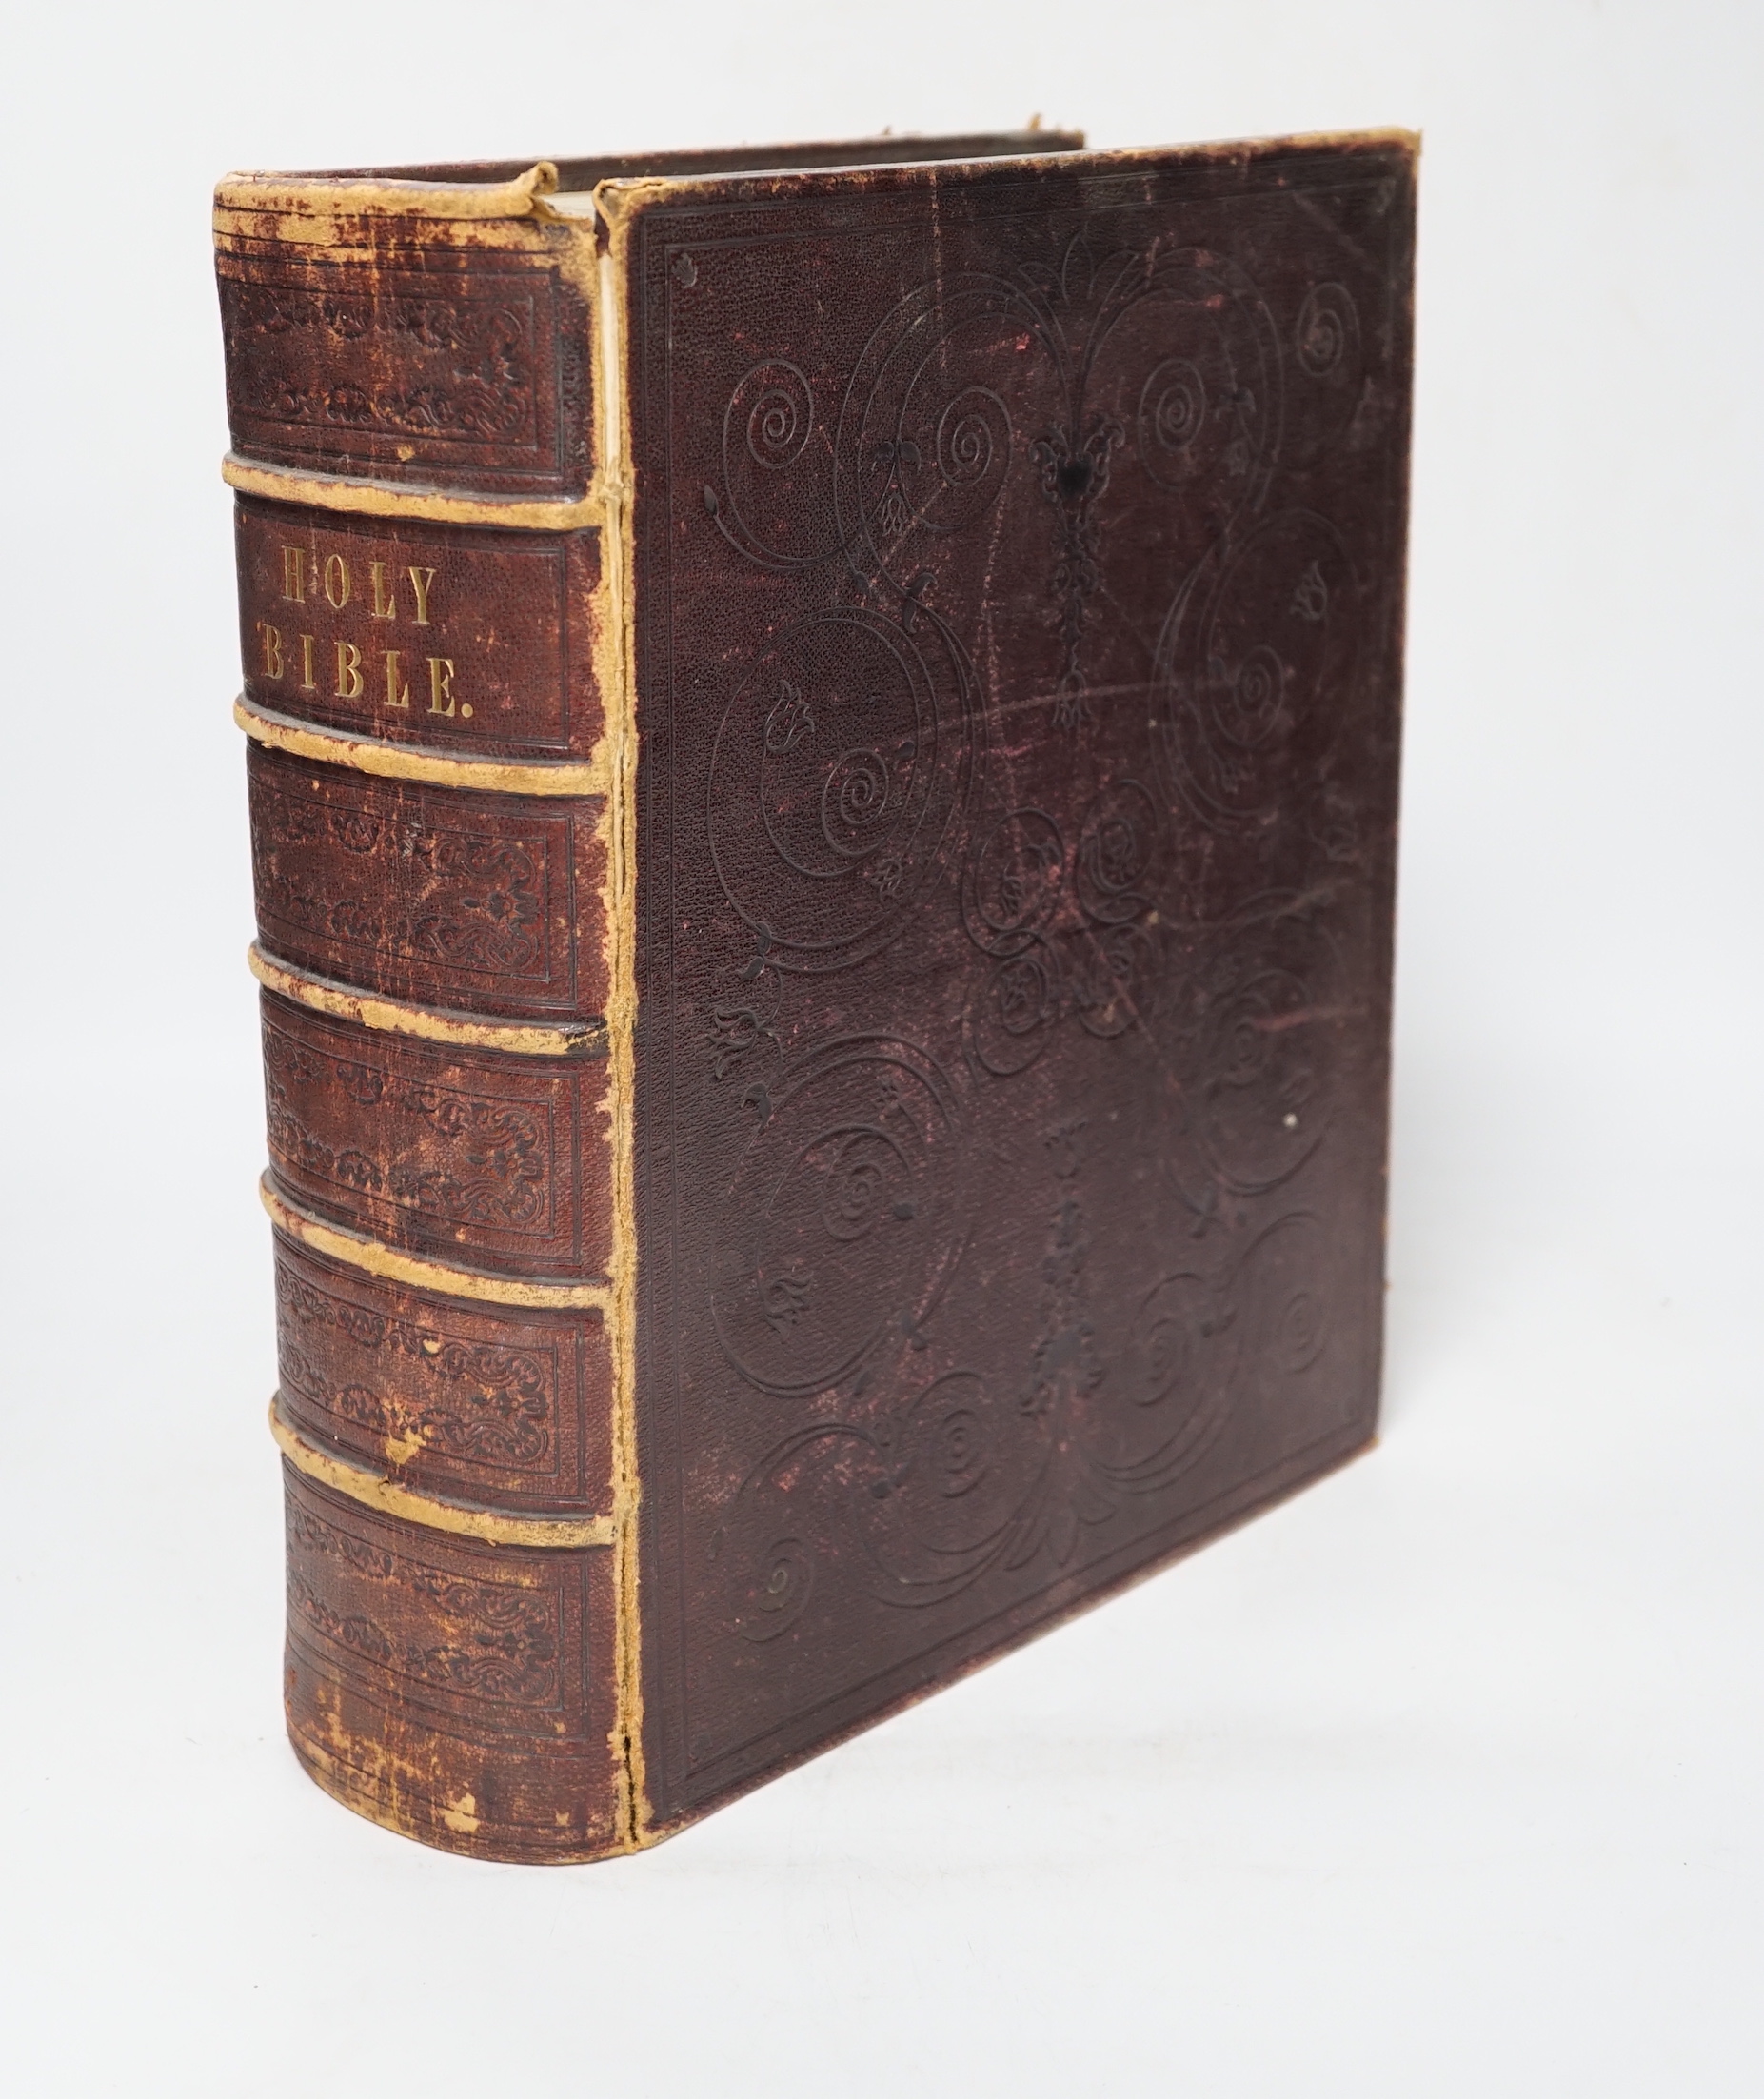 An 1839 Holy Bible printed at the University press Oxford, by Samuel, Collingwood and Co with leather binding